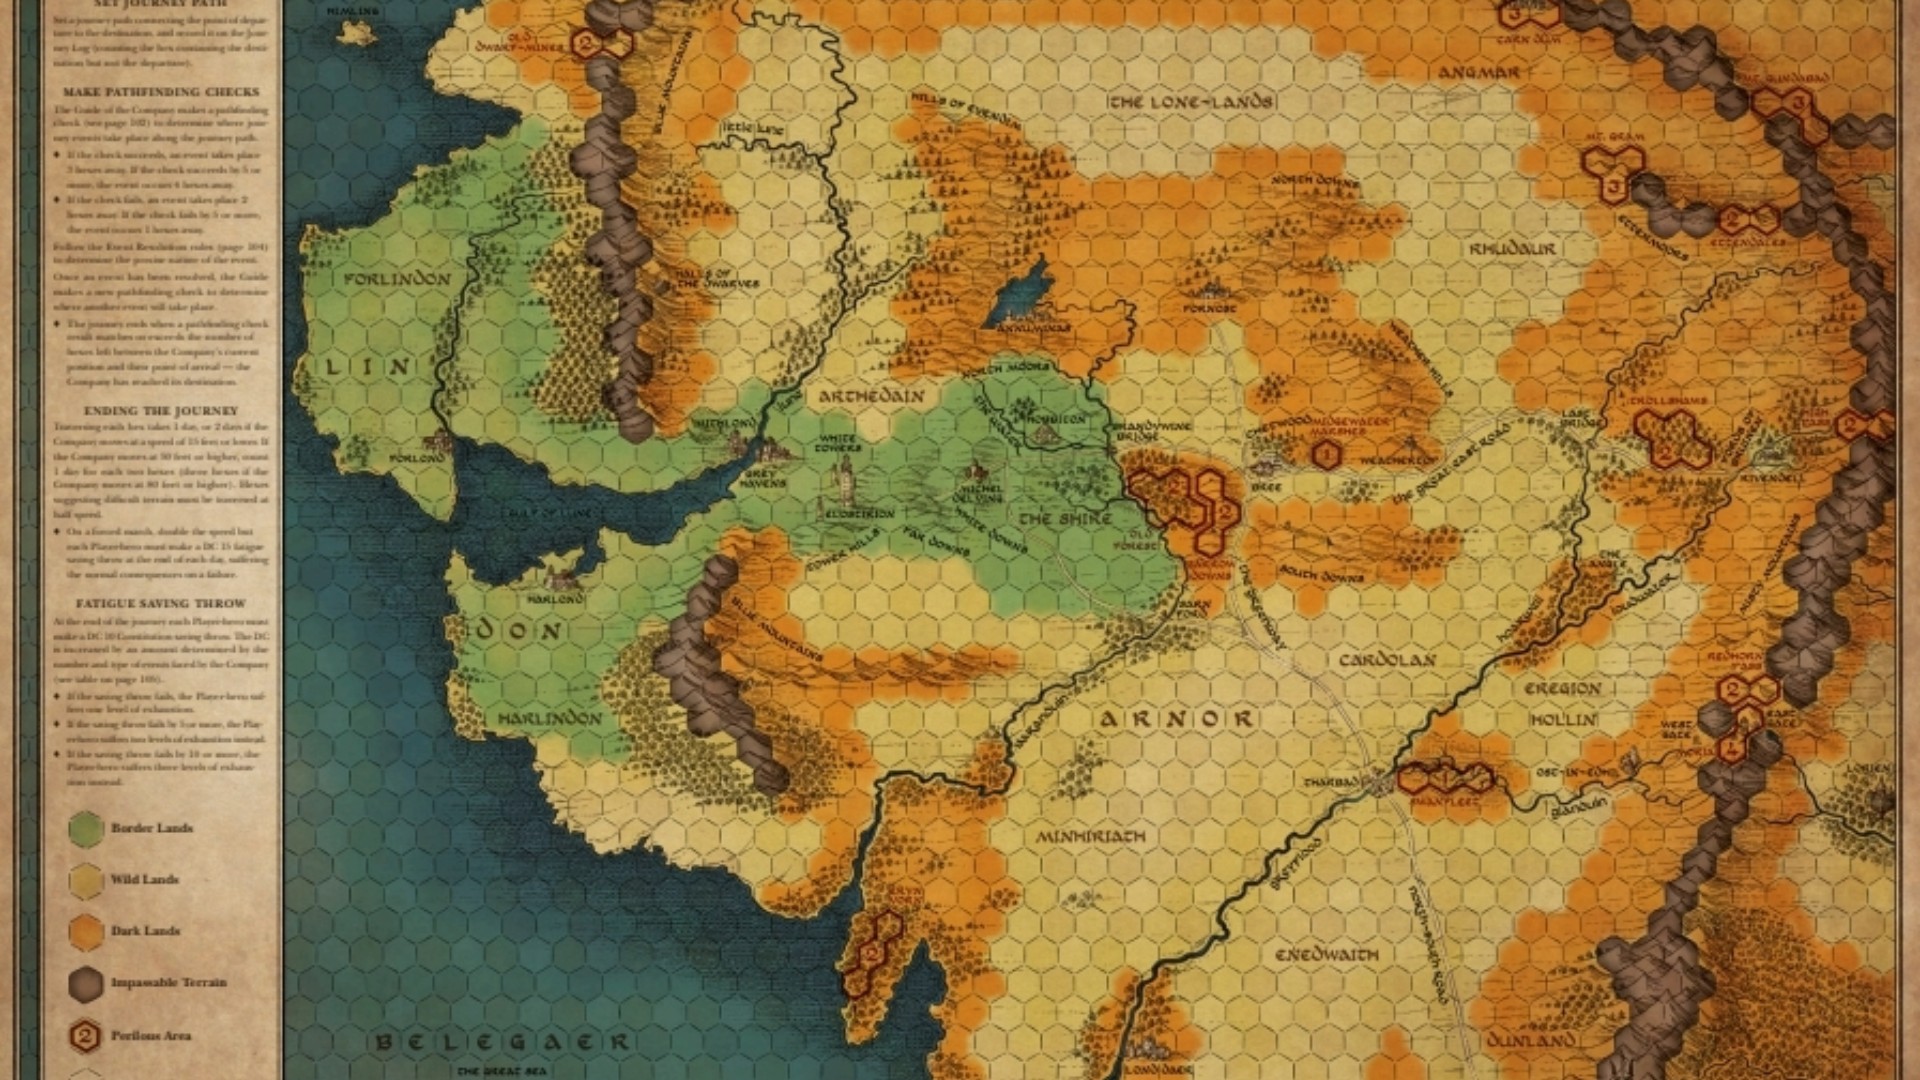 A map with a yellowed paper texture, a mass of land to the right and an ocean to the left. Along the left side there is a scroll with a lot of text inside. 